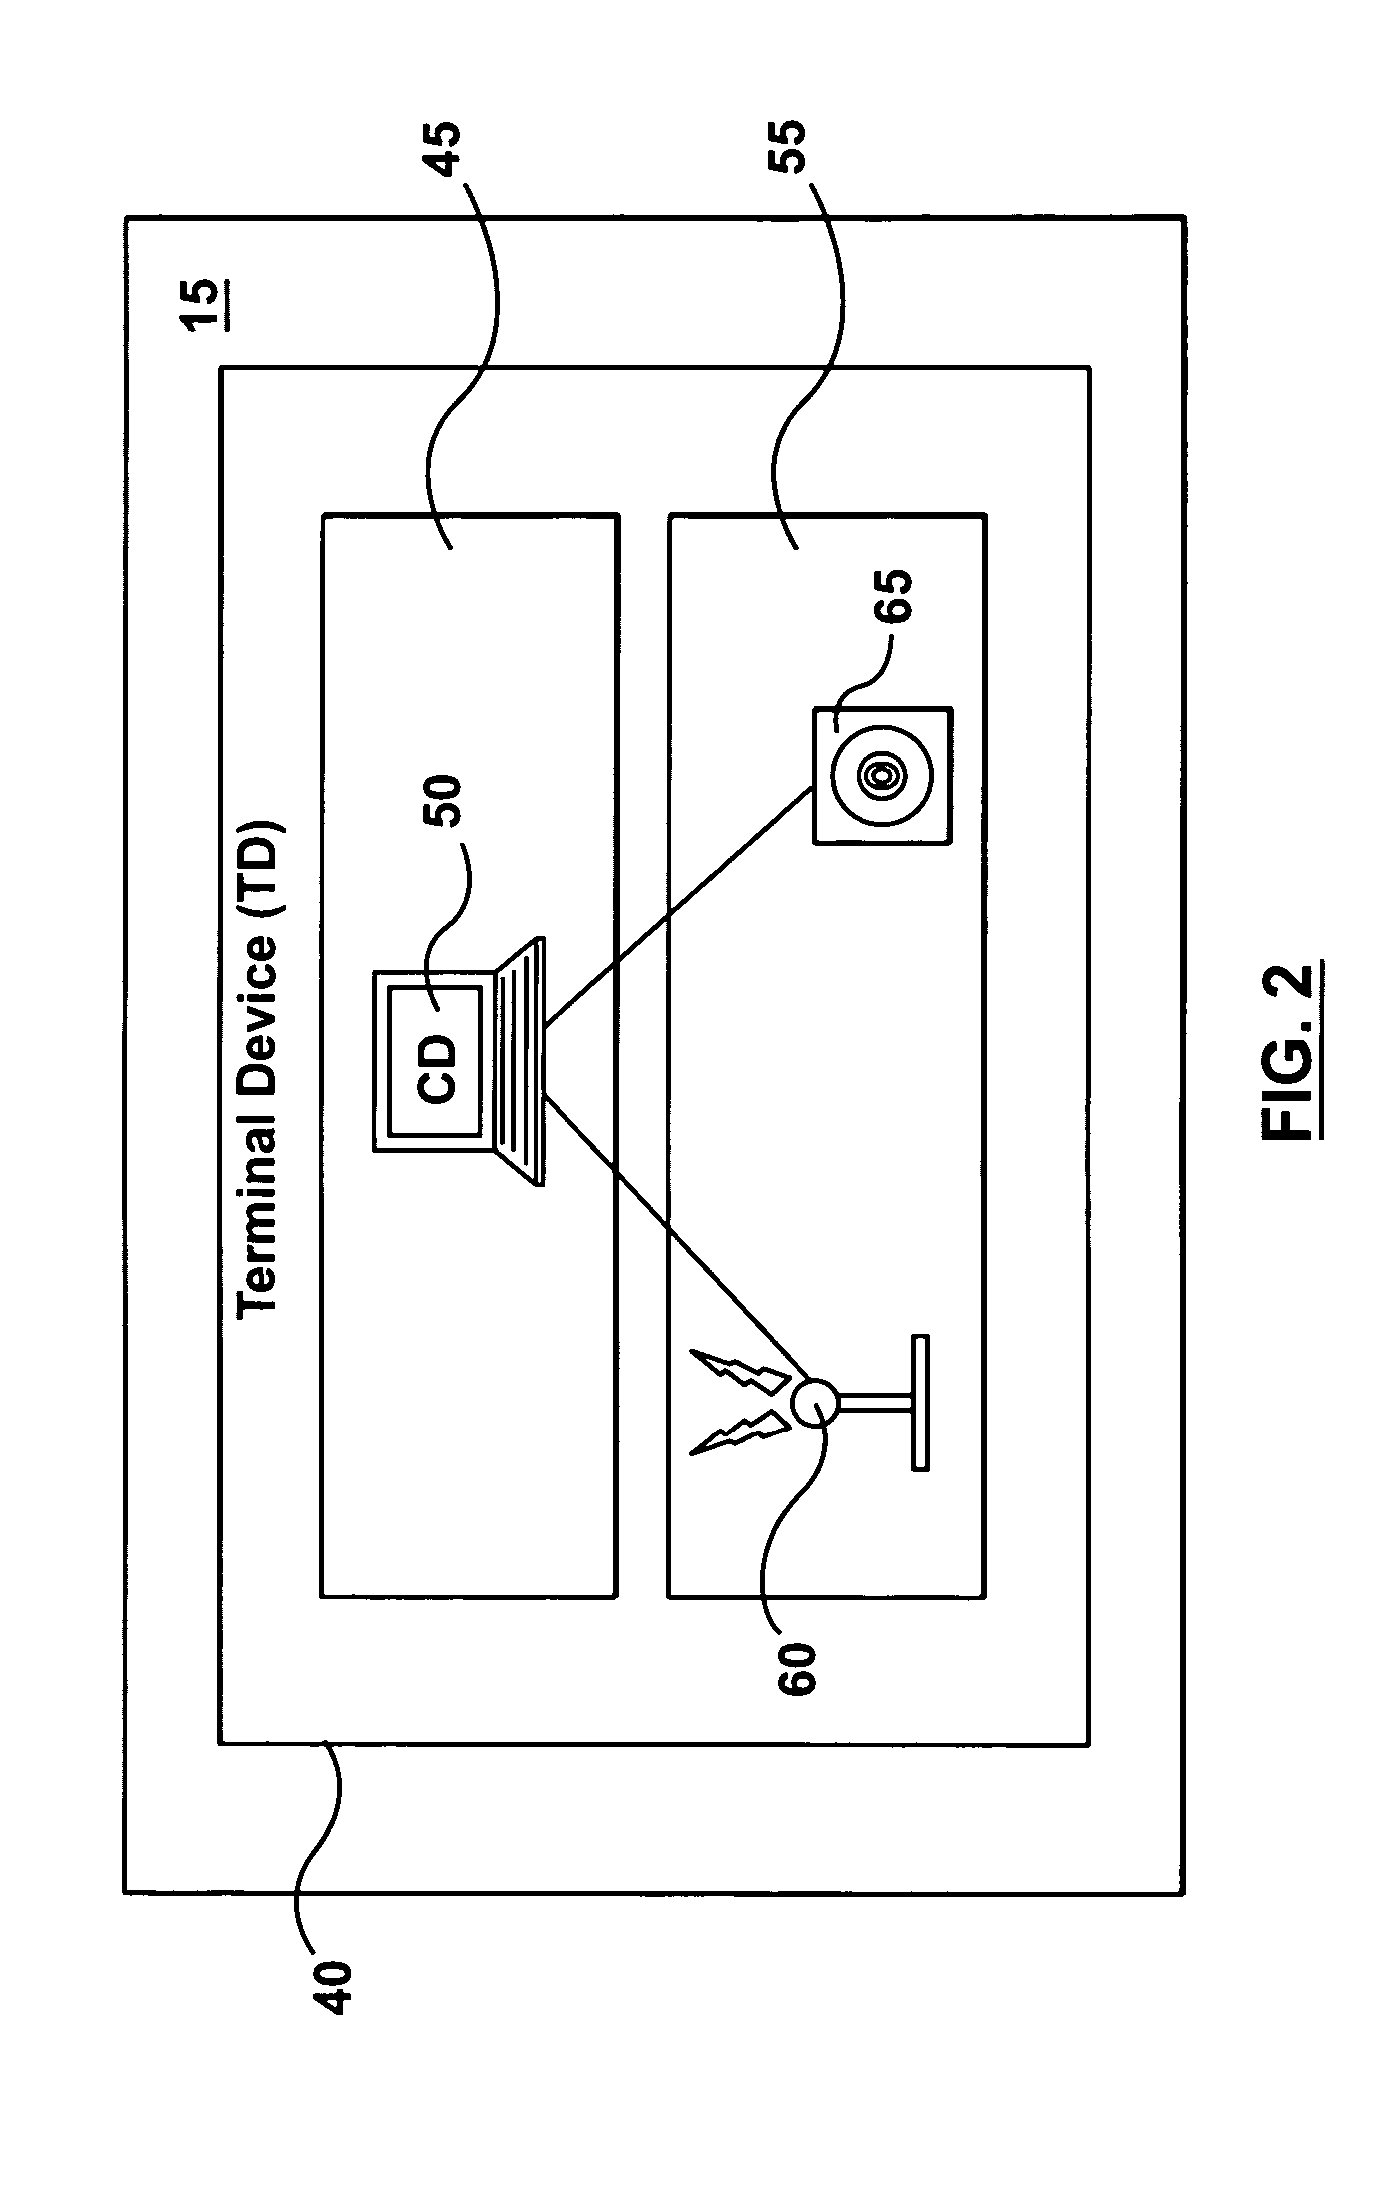 System and method for a mobile AD HOC network suitable for aircraft